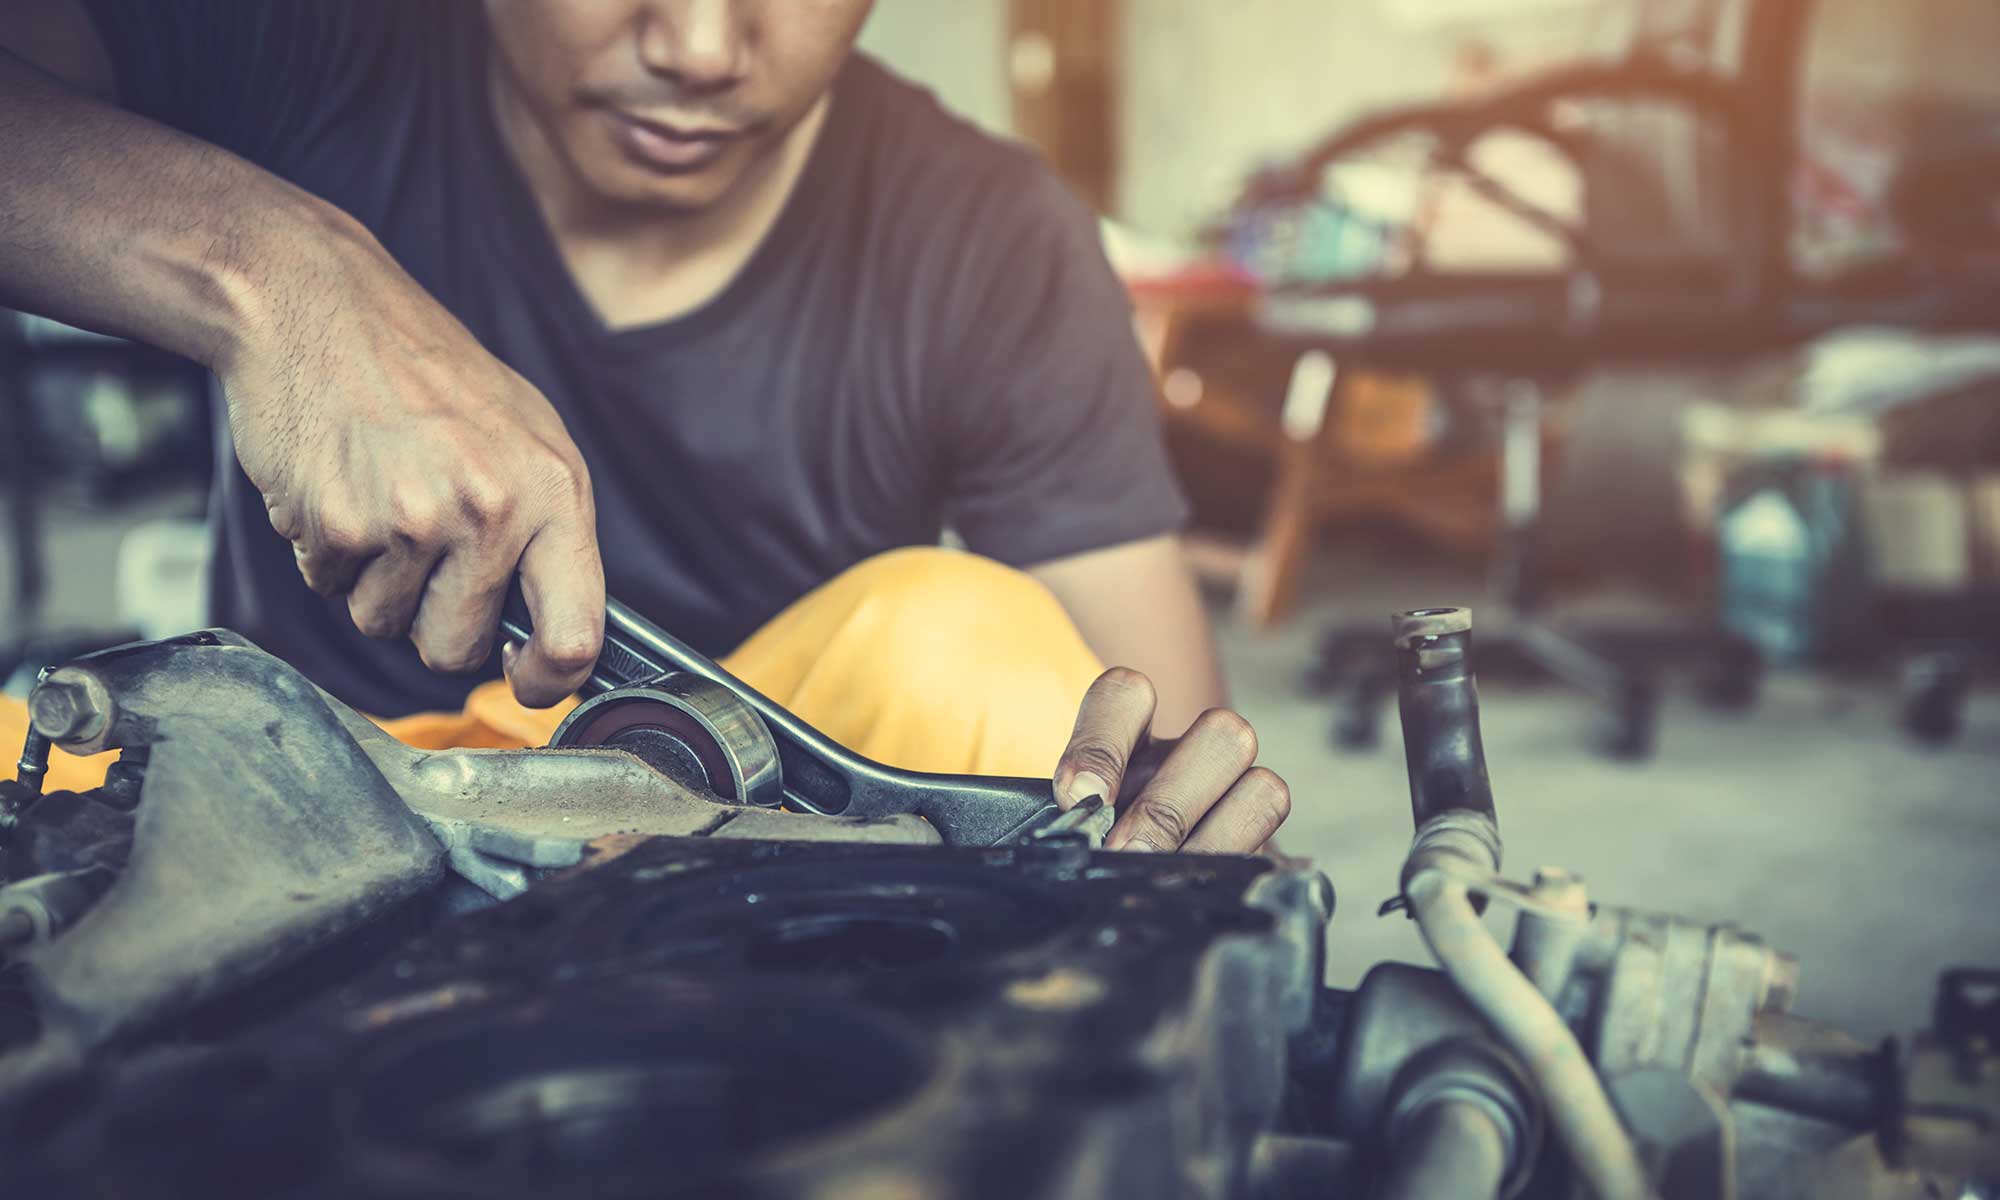 Mechanic using wrench and maintaining an engine